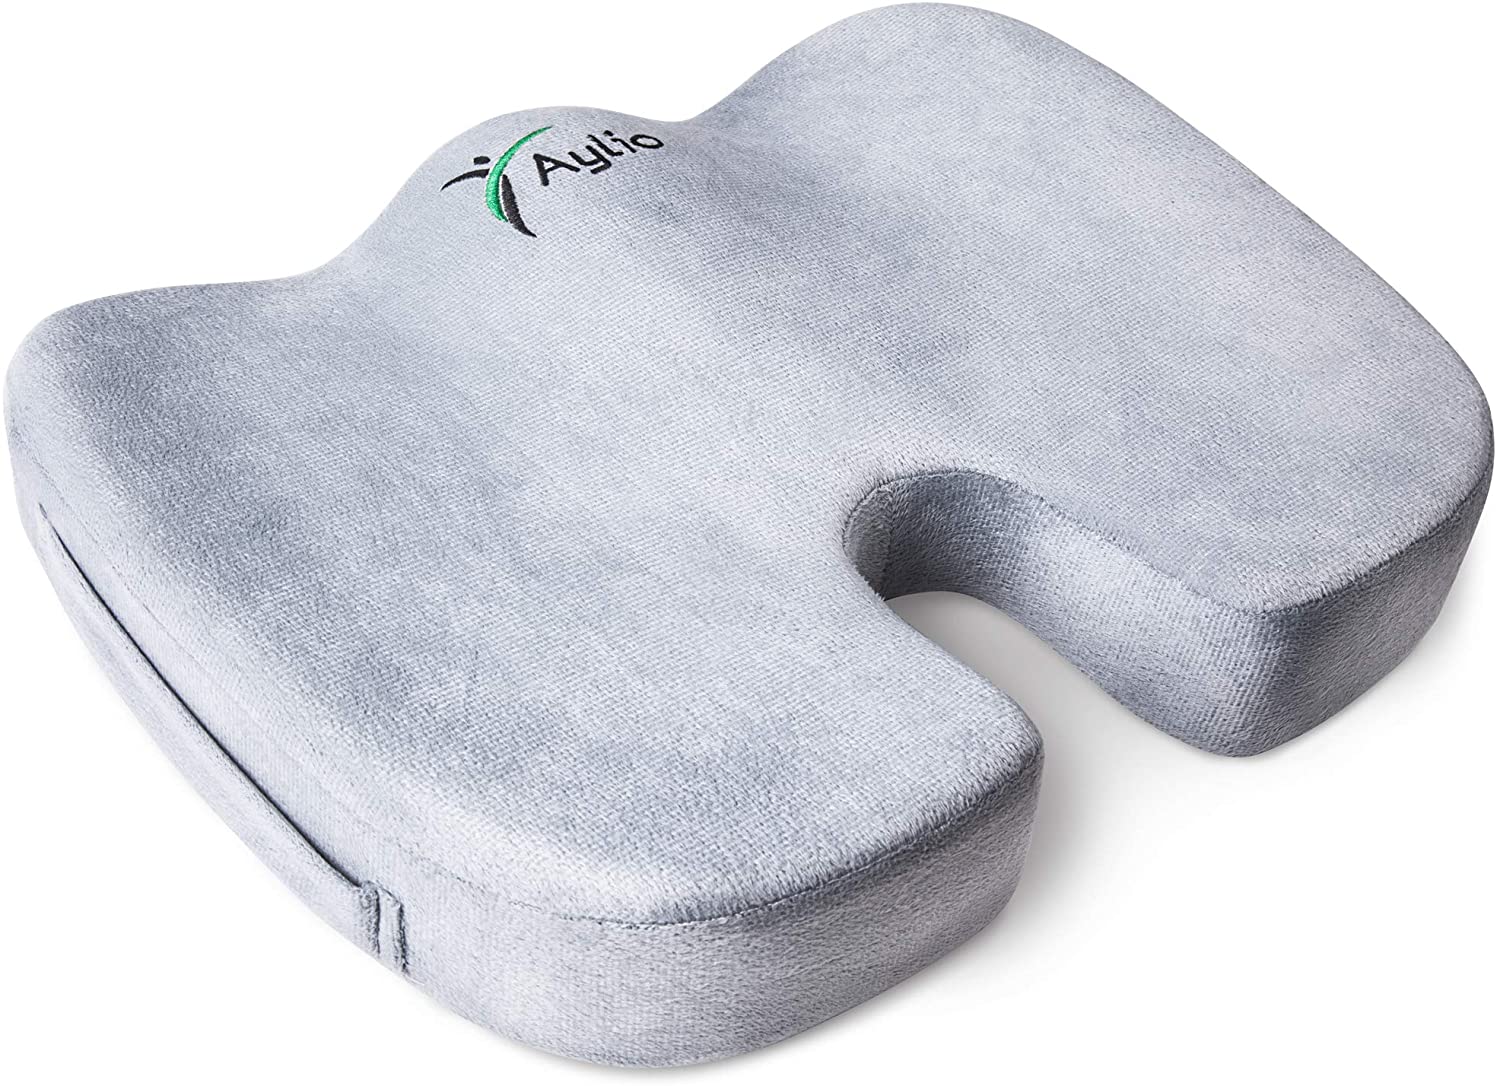 Get comfortable with coccyx cushions